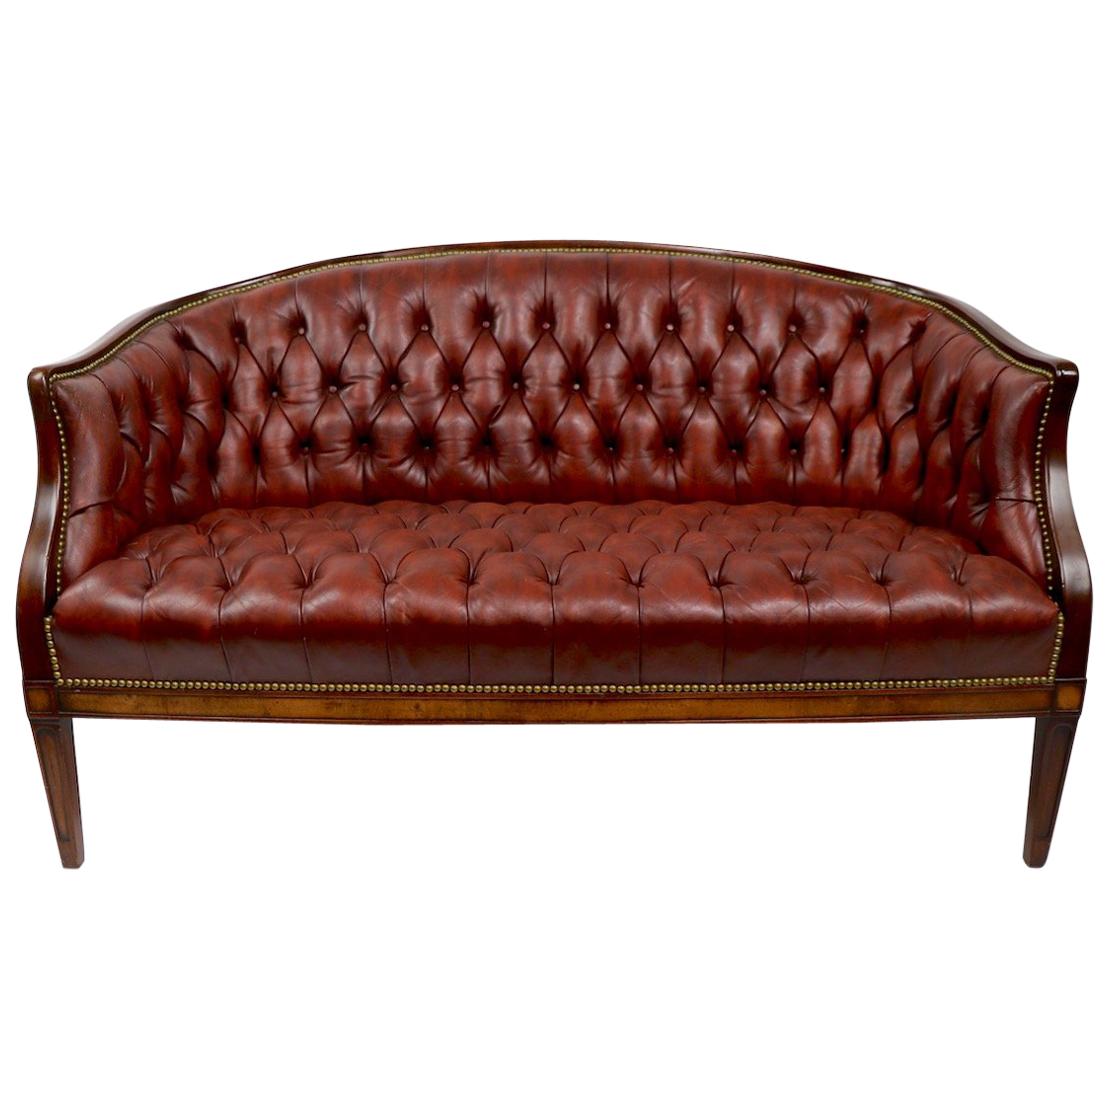 Tufted Leather Sofa Made by Hickory Chair Company Retailed by B. Altman